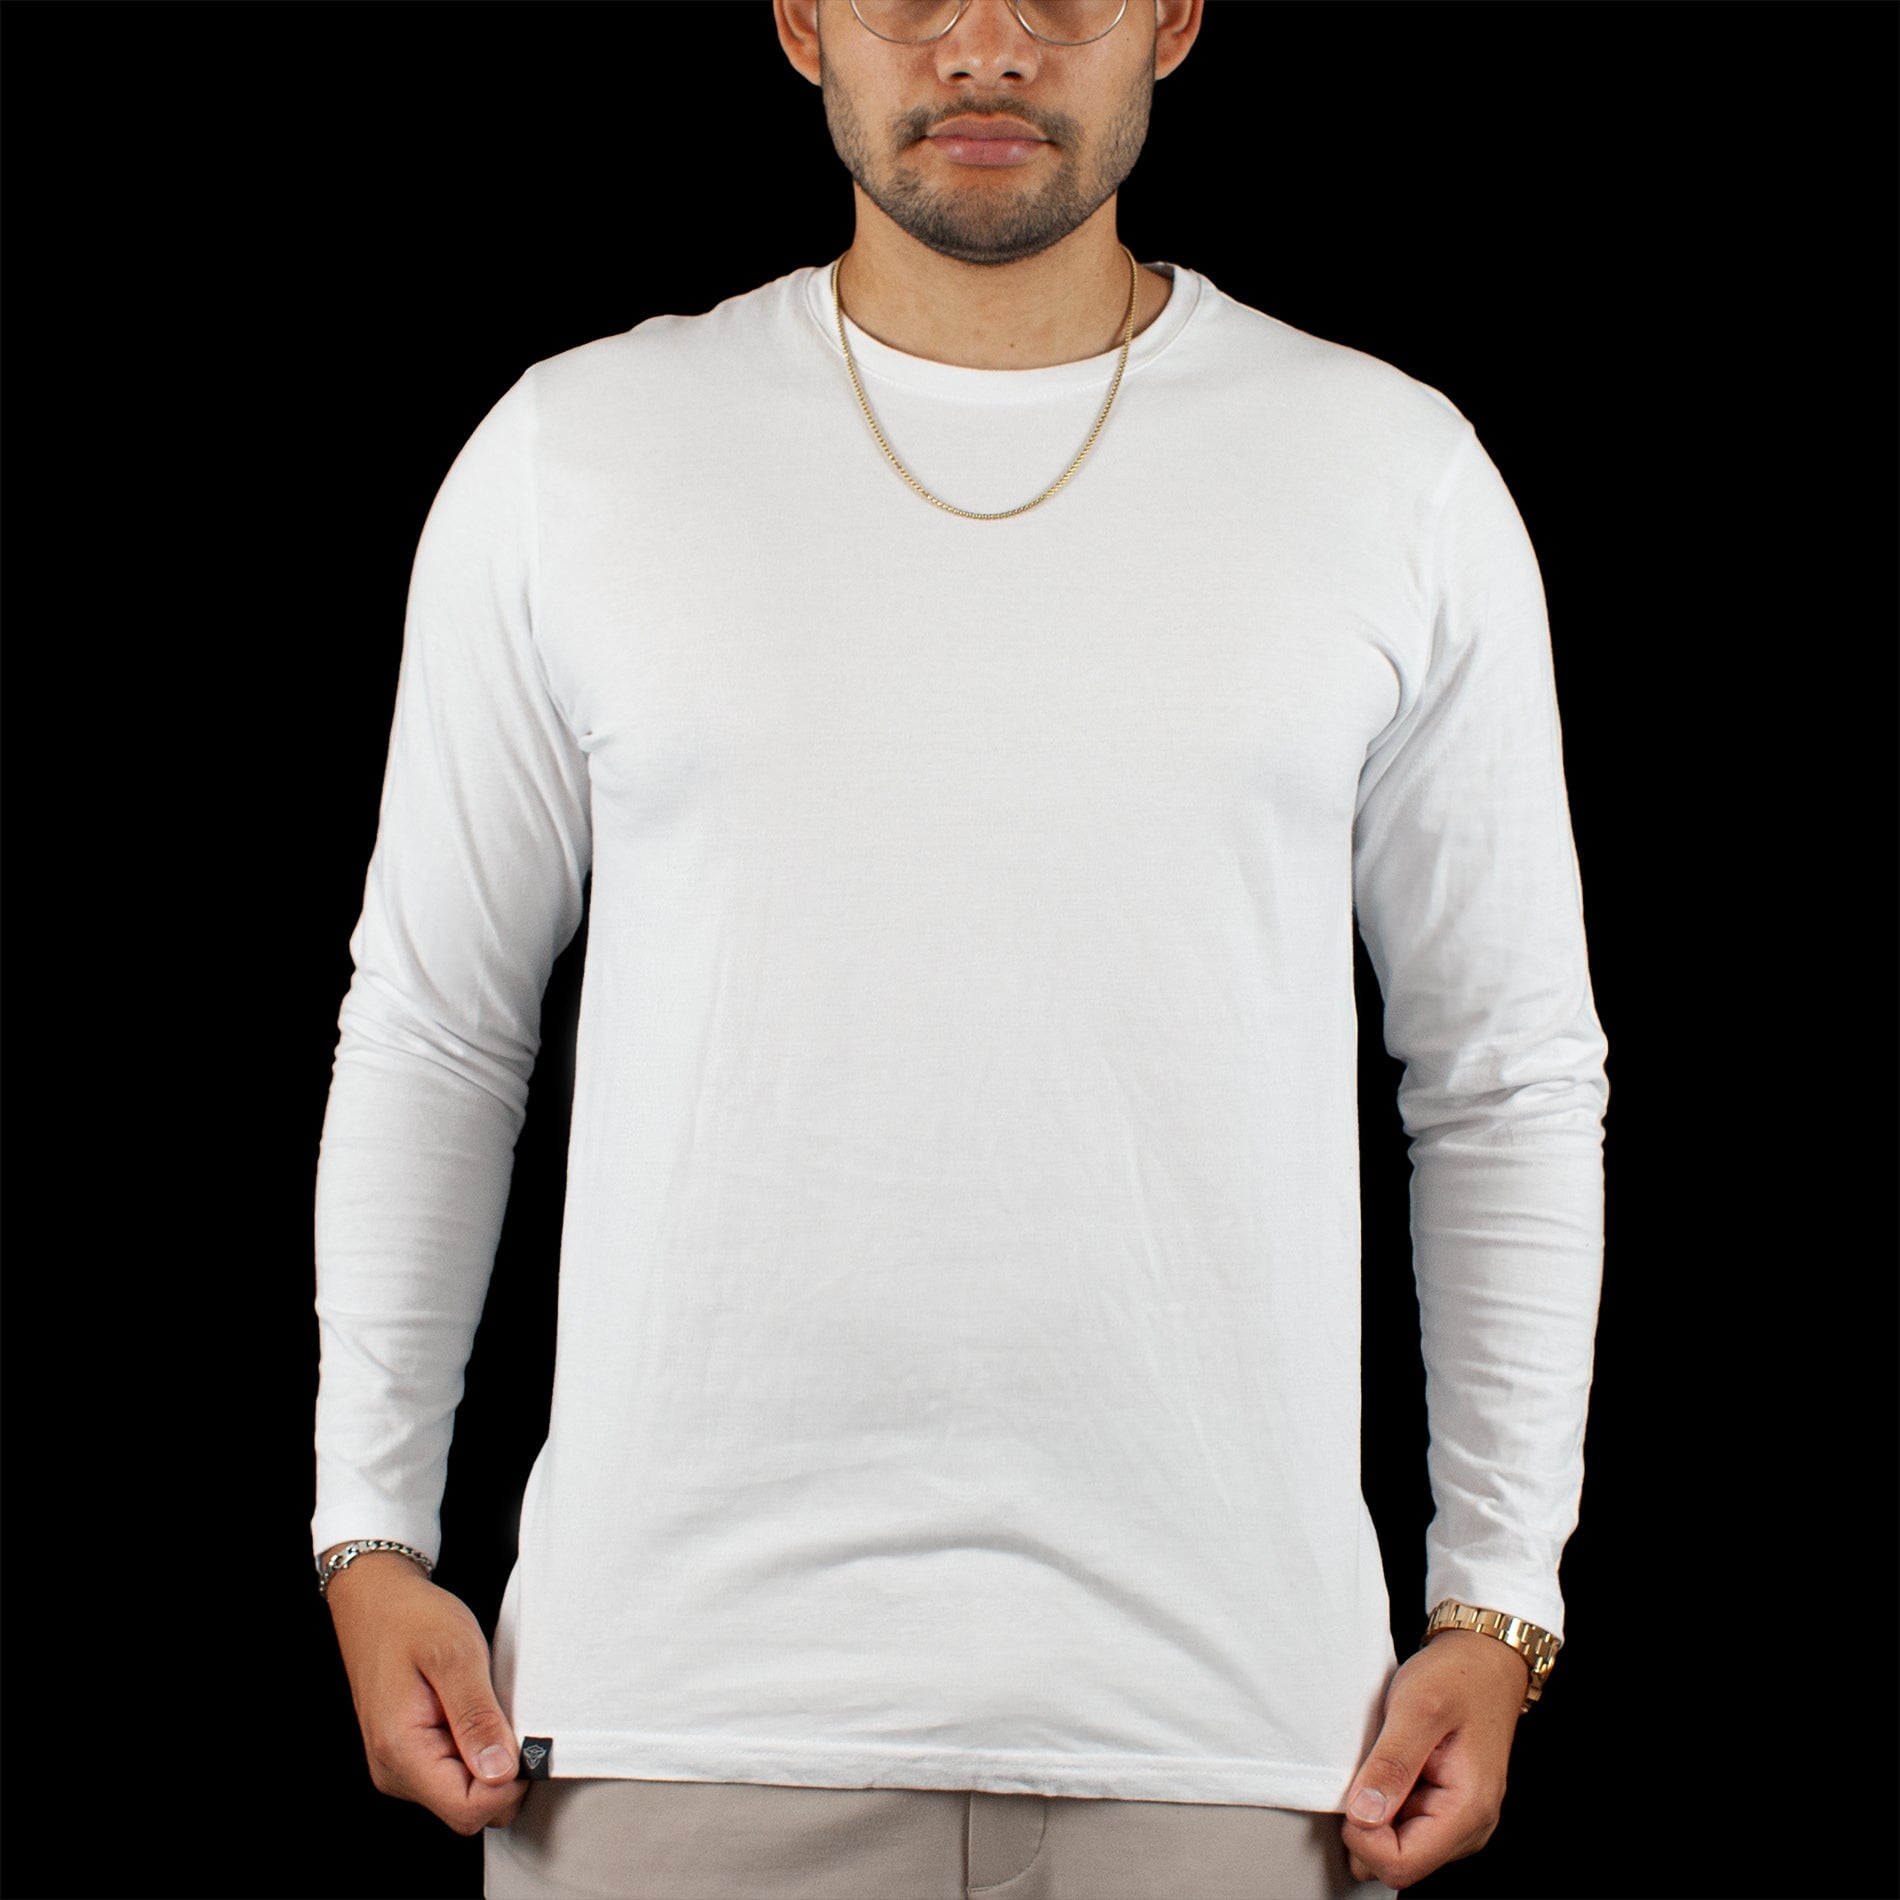 Big Moves - All-Rounder Longsleeve